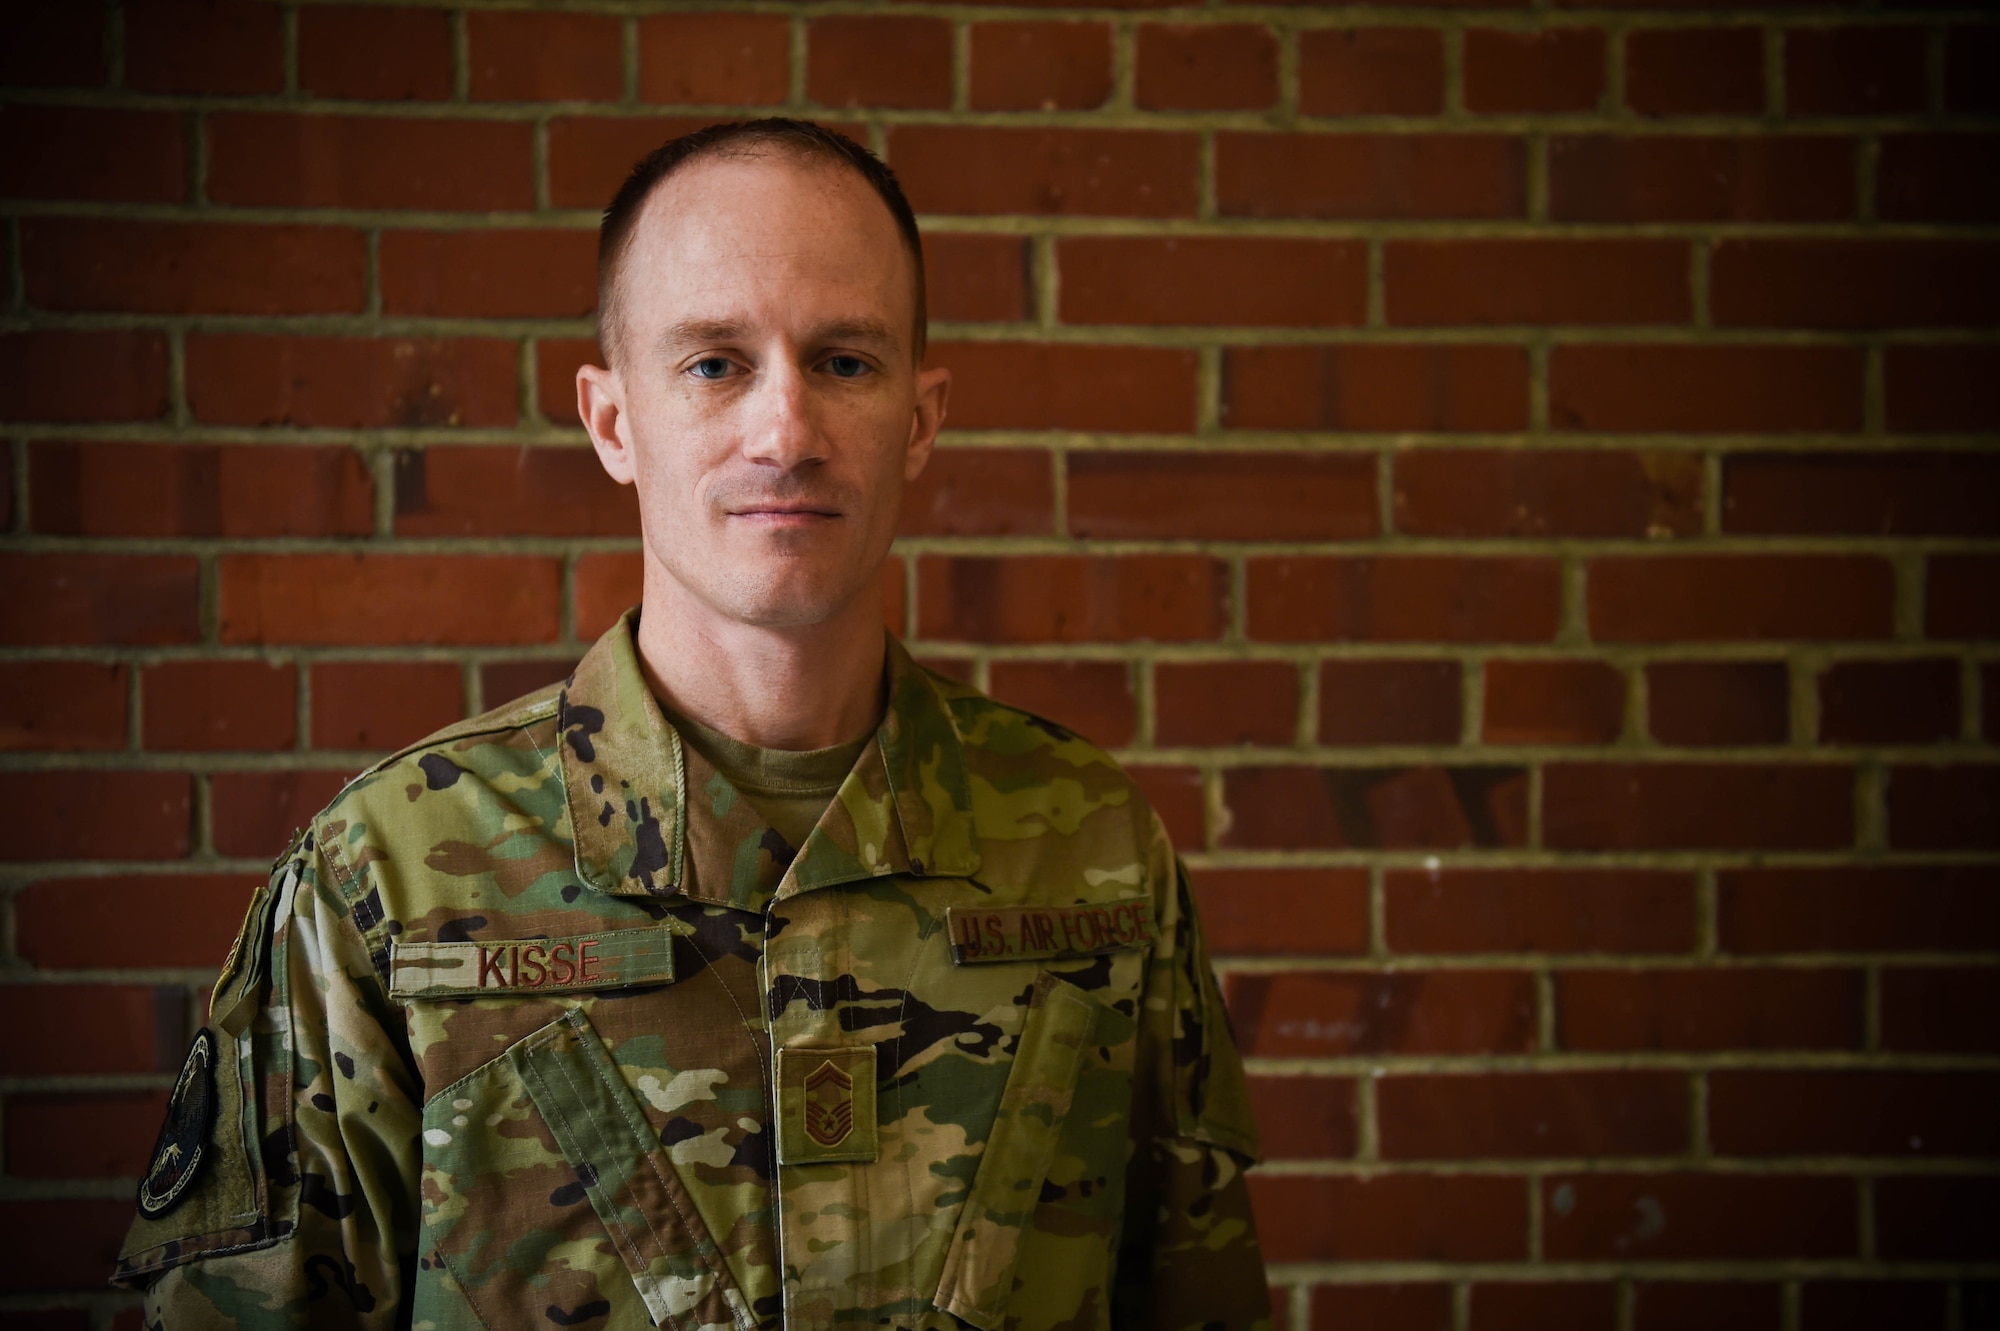 Senior Master Sgt. Christopher Kisse, 361st Recruiting Squadron superintendent, poses for a photo on Joint Base Lewis-McChord, Wash., Nov. 26, 2019. He was one of the nine McChord Airmen selected this year for promotion to chief master sergeant, the highest enlisted rank in the Air Force.

“Making chief master sergeant is a direct reflection of teachable moments molding me over the course of this journey. I am humbled to have been selected to join the Chief ranks and am blessed to have the opportunity to pay forward the leadership my chief mentors provided to me throughout my career. 
There is no such thing as a leadership style. We have unique and individual Airmen that make up our force. It’s our responsibility to adapt to that uniqueness, align the strengths and goals of those individuals with the mission, and champion a loyal and dedicated team.
Chief master sergeant is not a rank you achieve on your own. I’m forever grateful countless teammates that I’ve worked alongside over years. I’m only on this list because of their efforts, faith and fortitude. Even more so, I’m indebted to my wife and children, they are the ones that truly sacrificed over the years, and my service is their service.”

(U.S. Air Force photo by Airman 1st Class Mikayla Heineck)